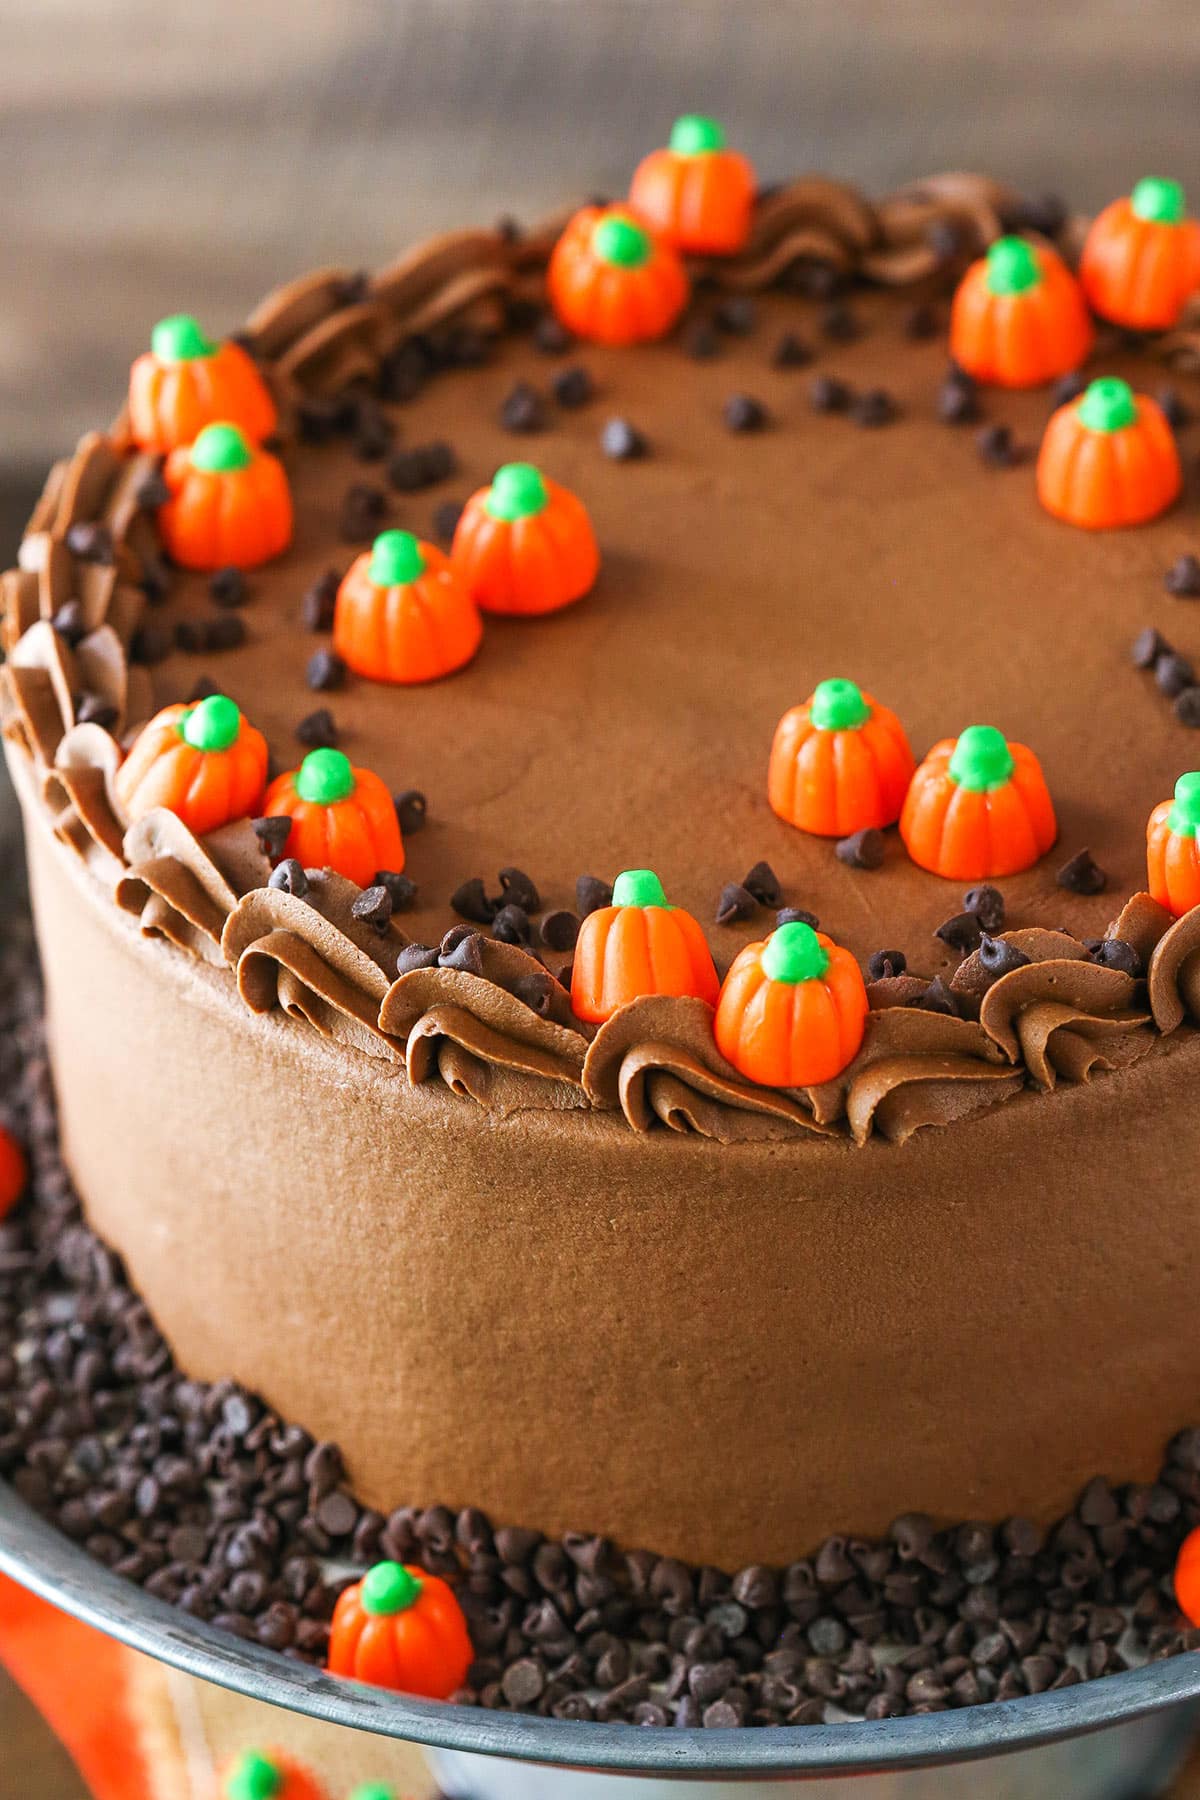 Overhead view of a full Pumpkin Chocolate Chip Layer Cake on a gray cake stand